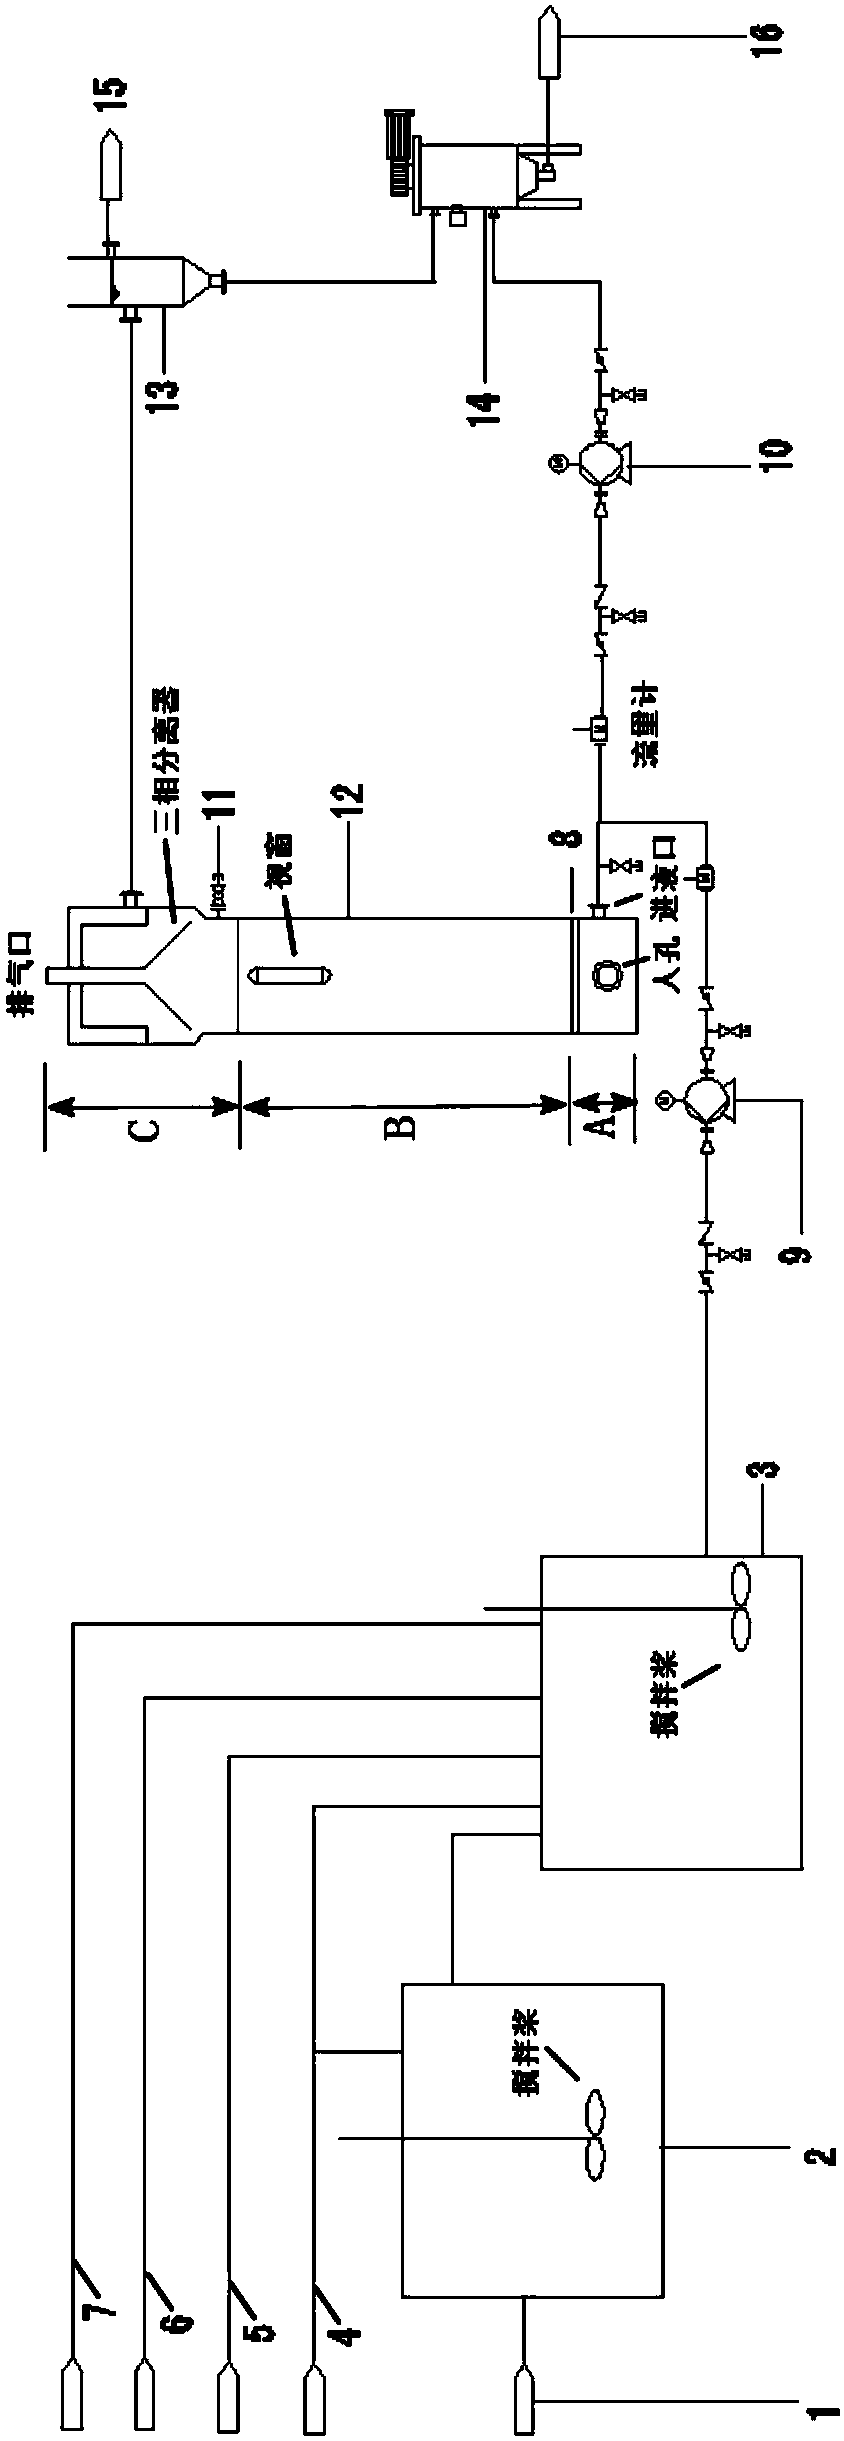 Ethylene glycol industrial waste water treatment device and method for treating ethylene glycol industrial waste water